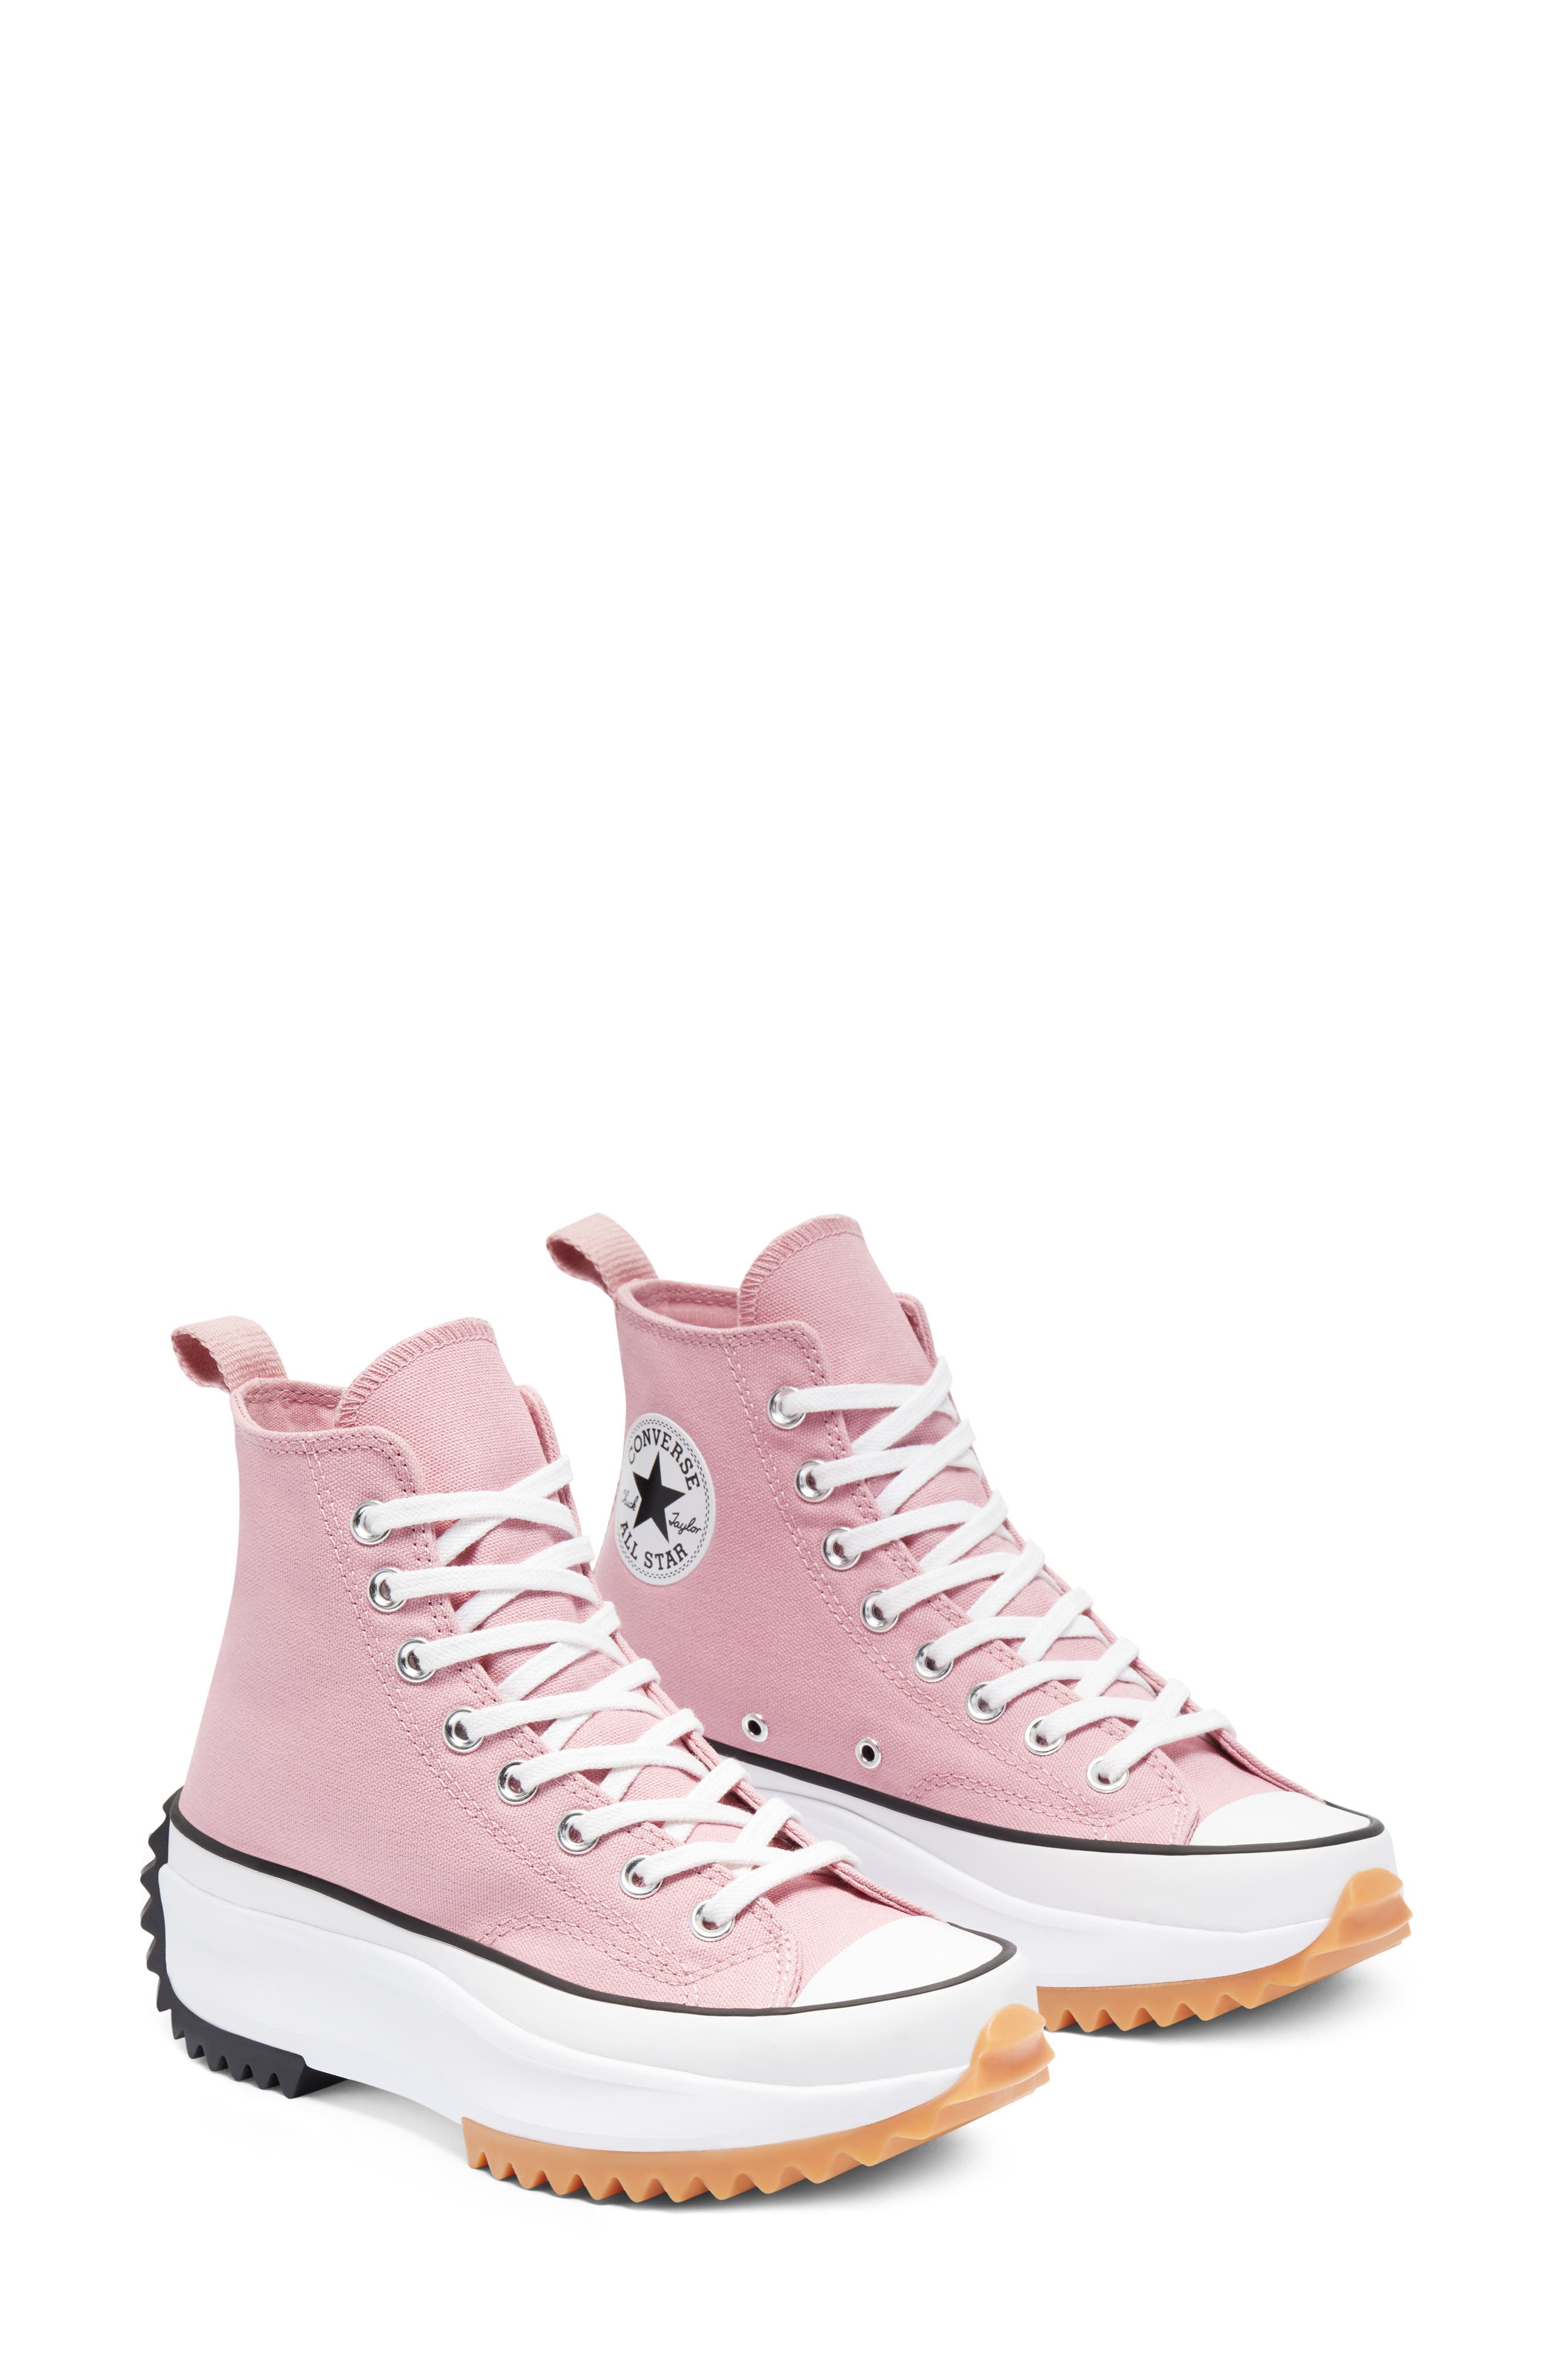 pink converse adult